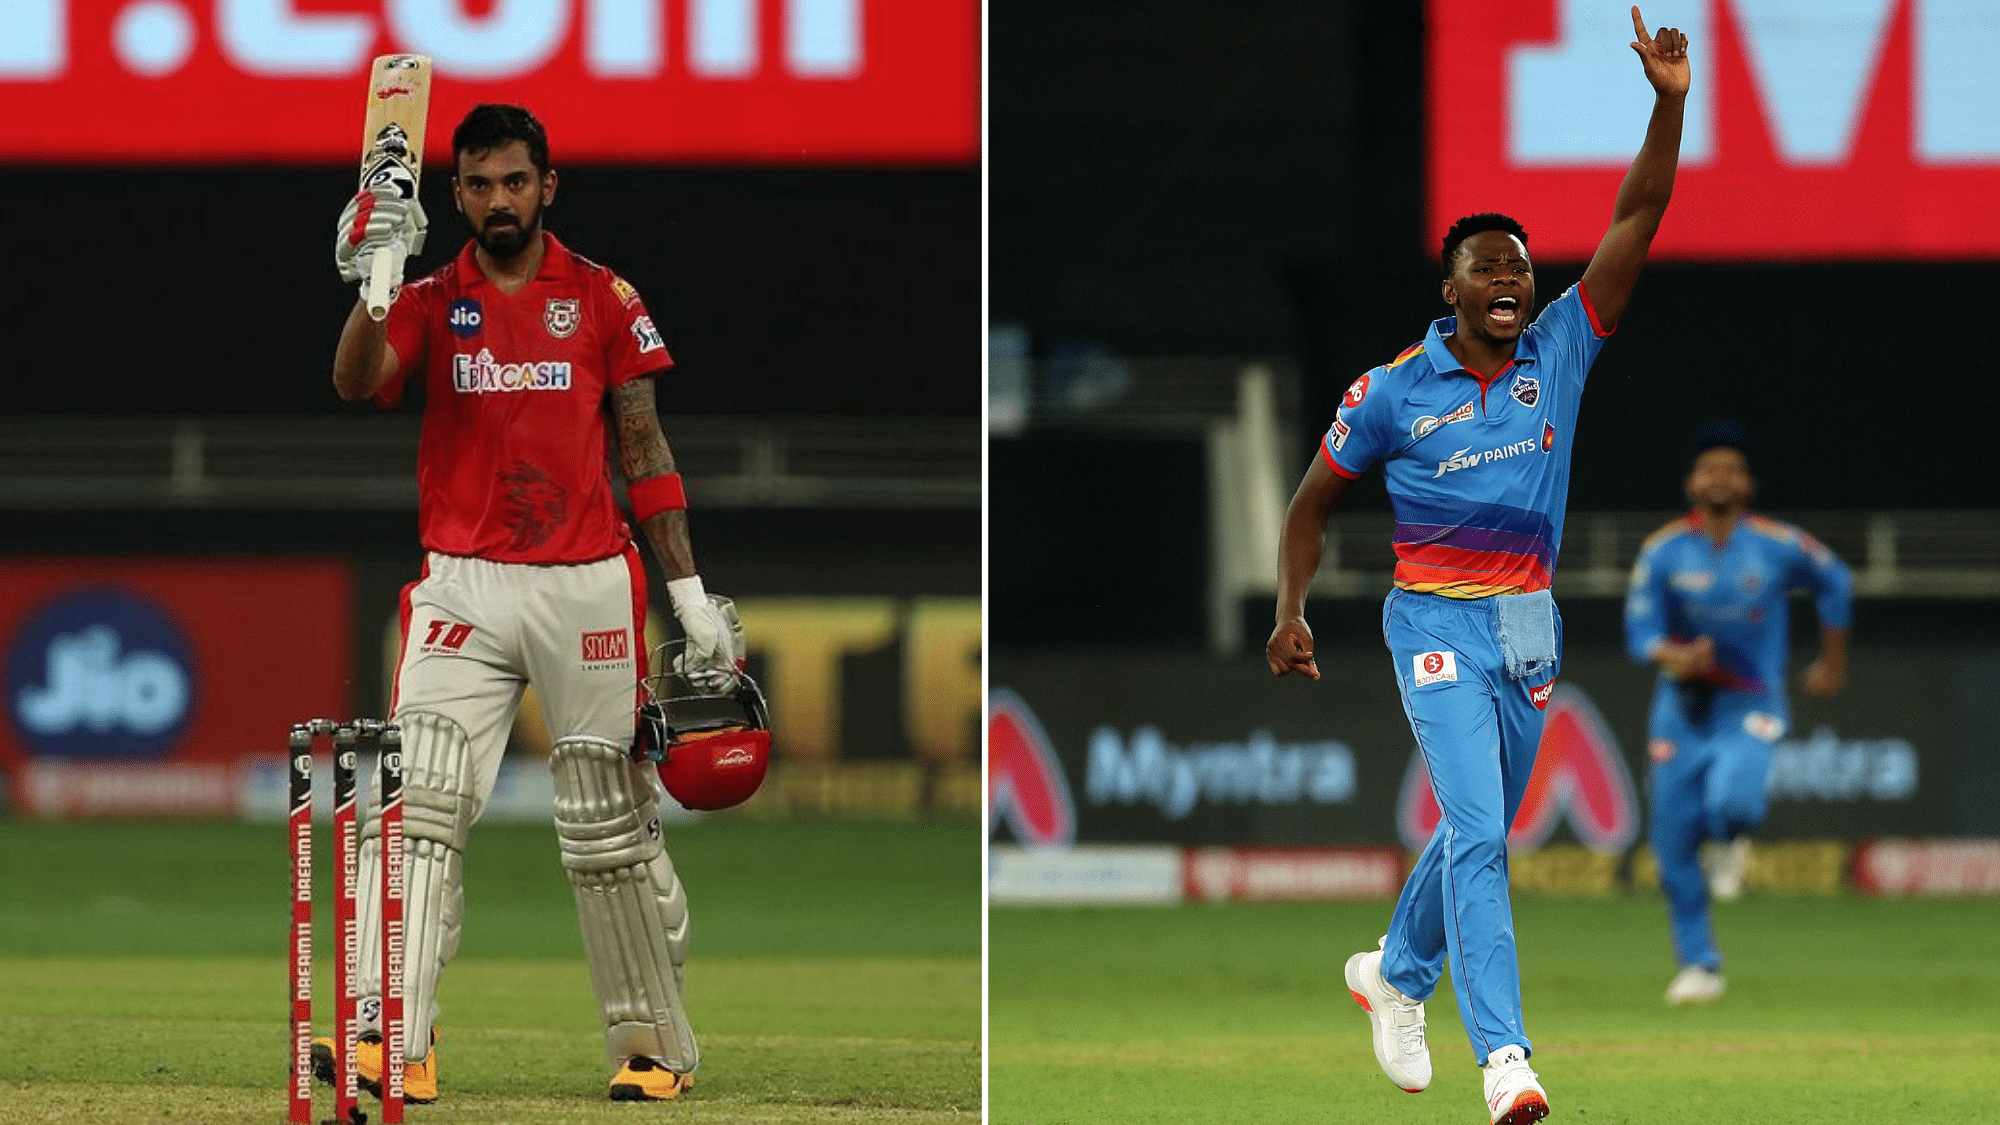 KL Rahul holds on to the Orange Cap with 448 runs, while Kagiso Rabada leads the Purple Cap race with 18 wickets